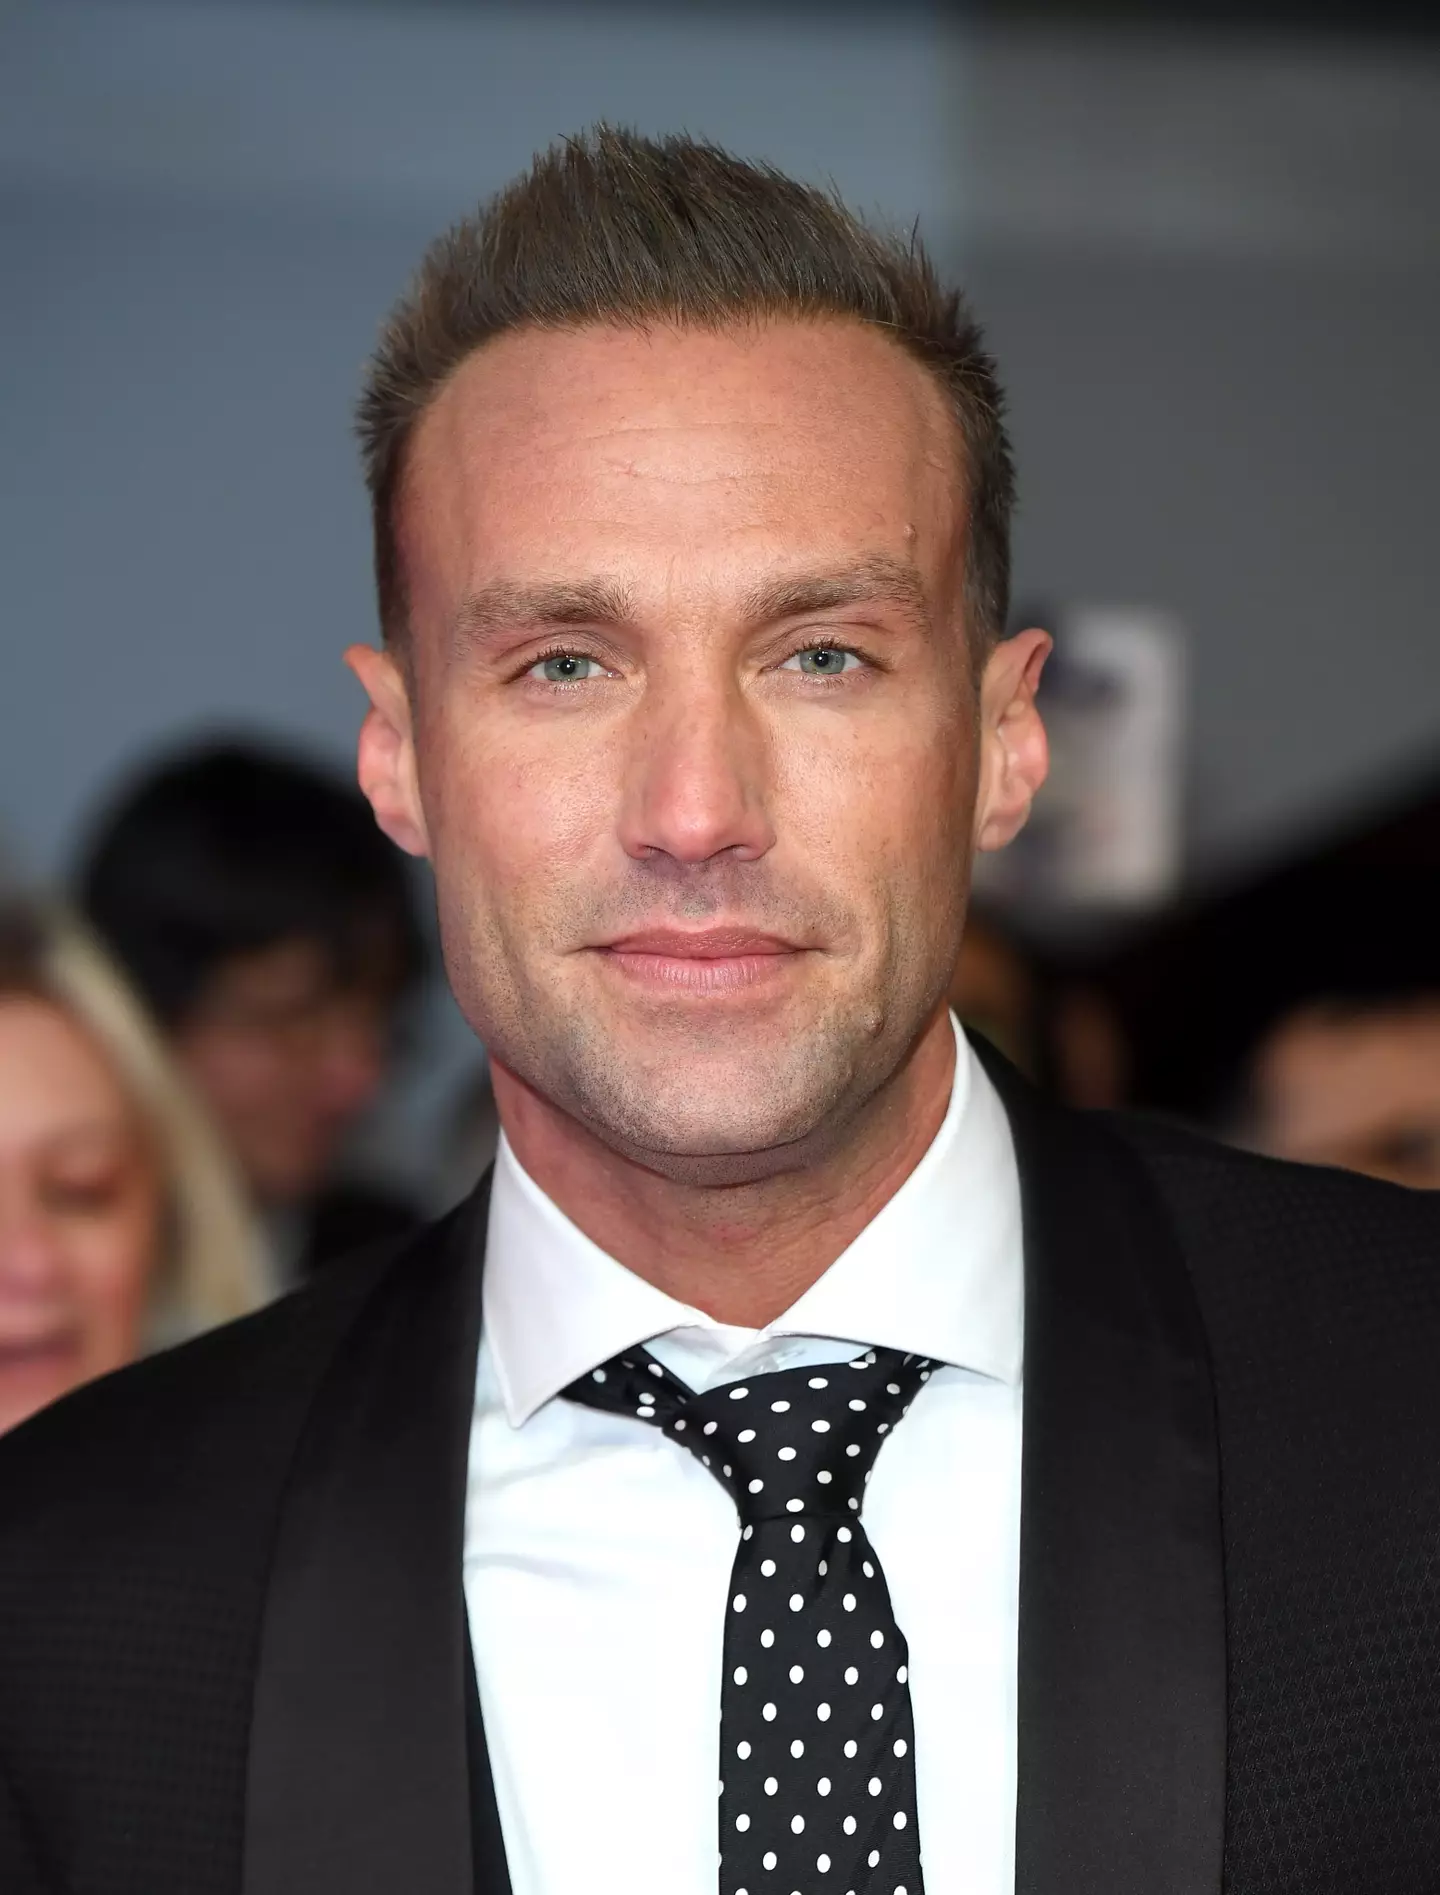 Calum Best could be facing up to three years in prison over alleged sexual assault at Wayne Lineker’s famous club in Ibiza.